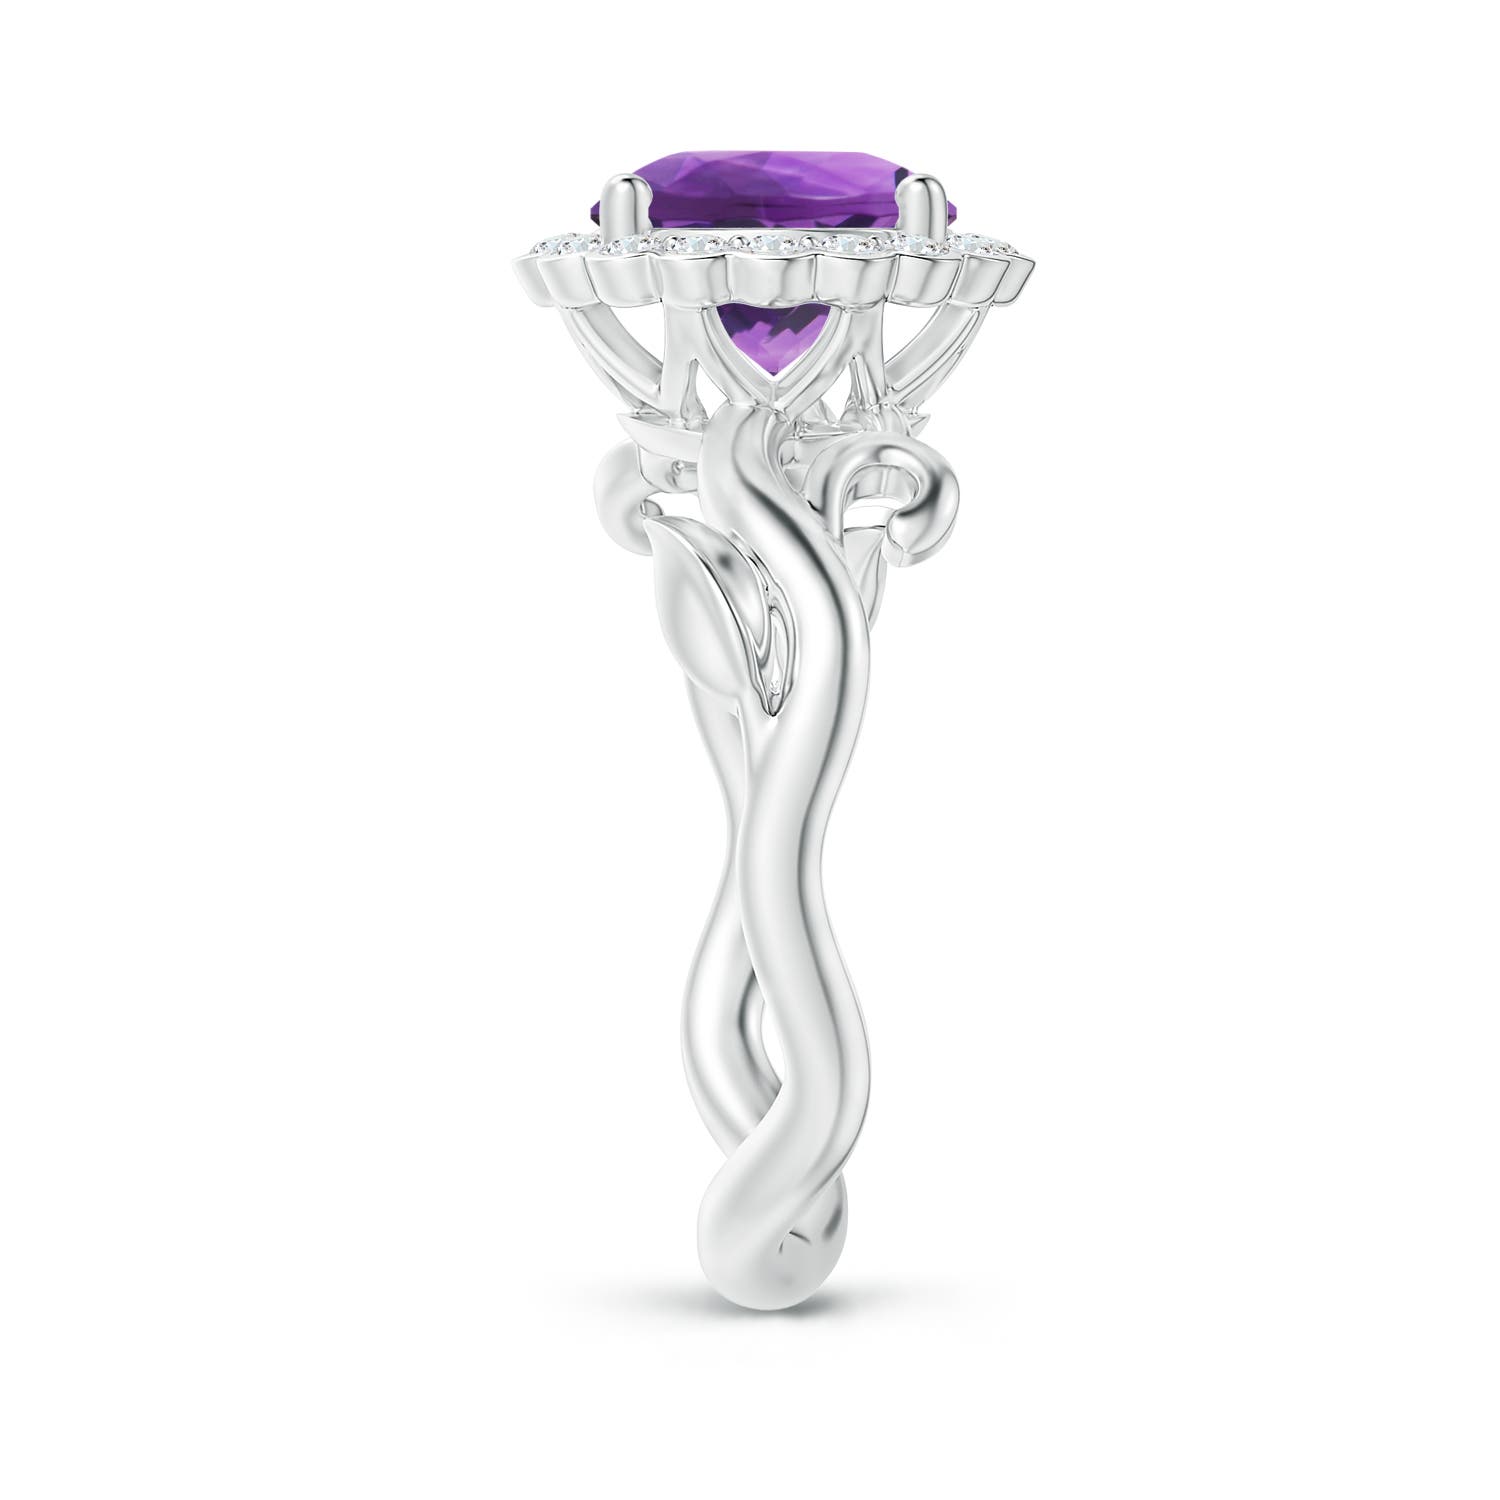 AAA - Amethyst / 1.95 CT / 14 KT White Gold